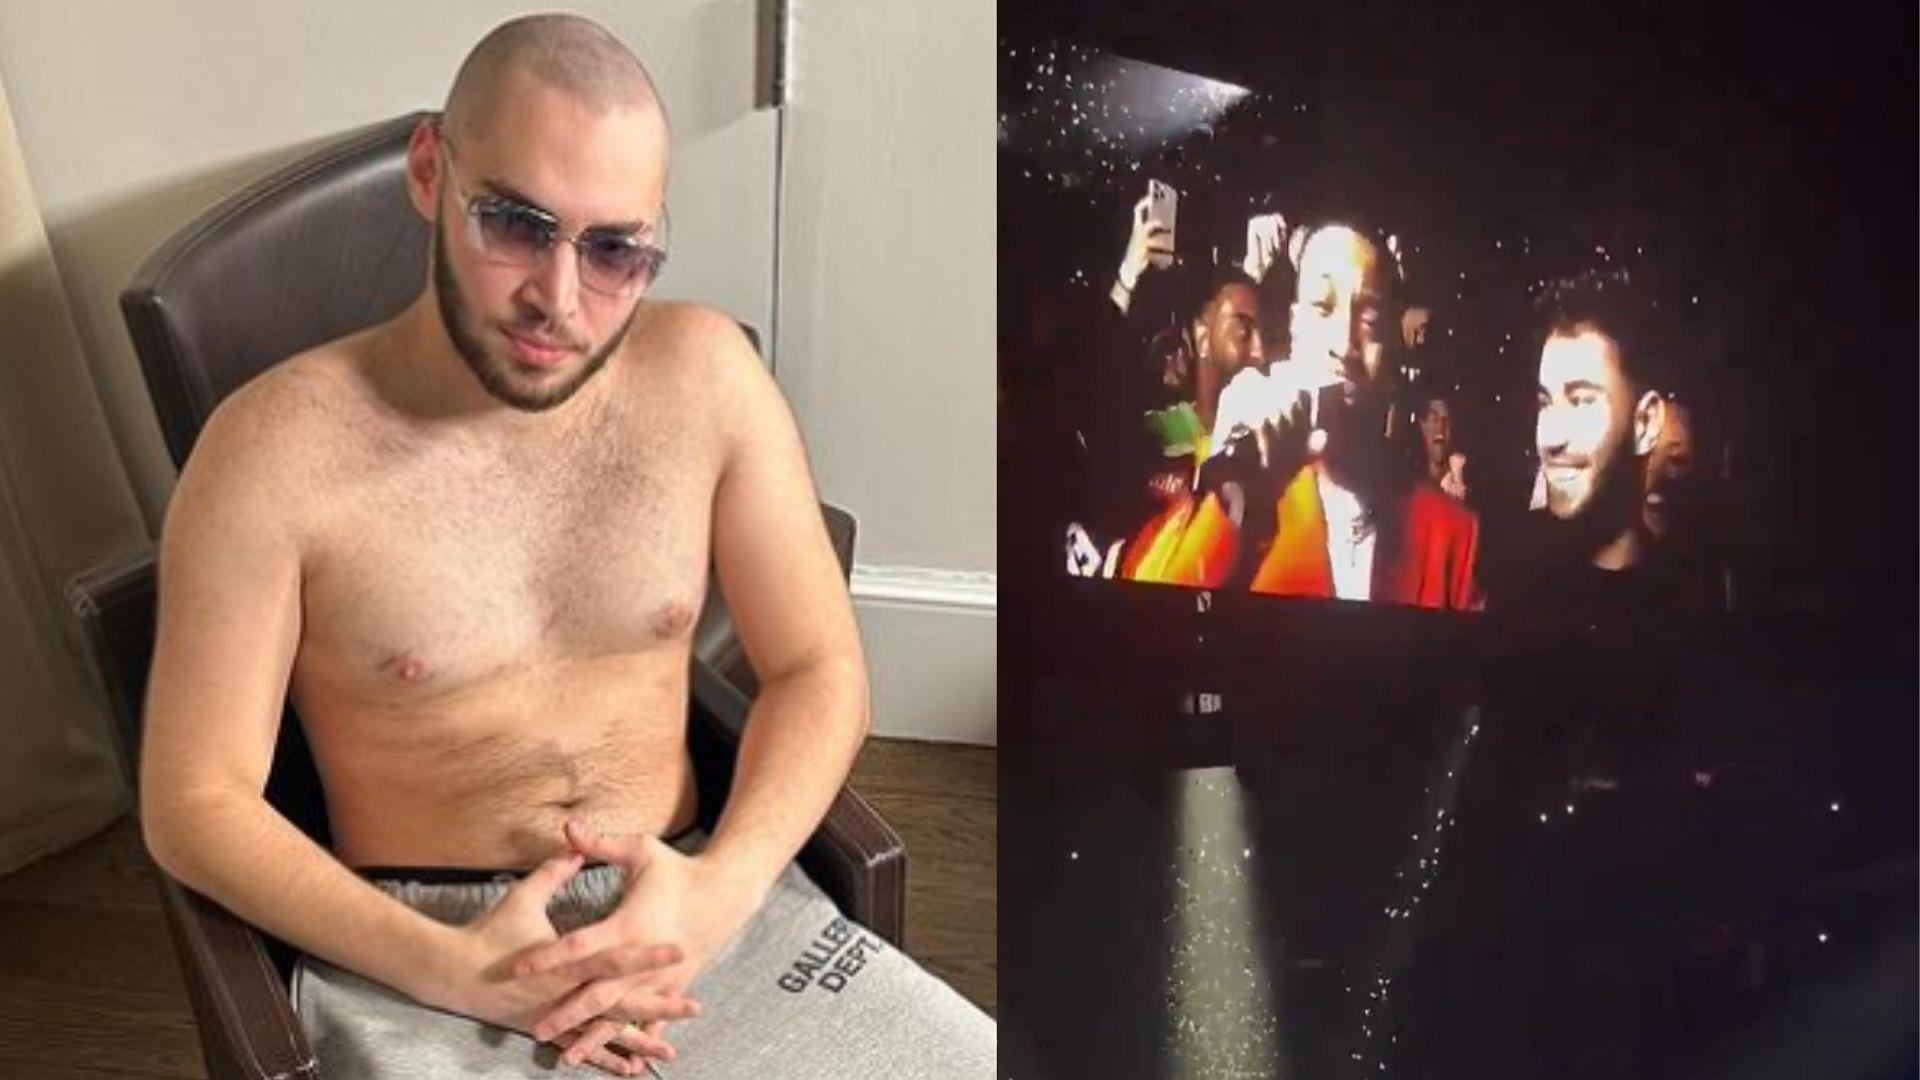 Fans speculate Adin Ross on drugs after him acting weird at Drake's concert